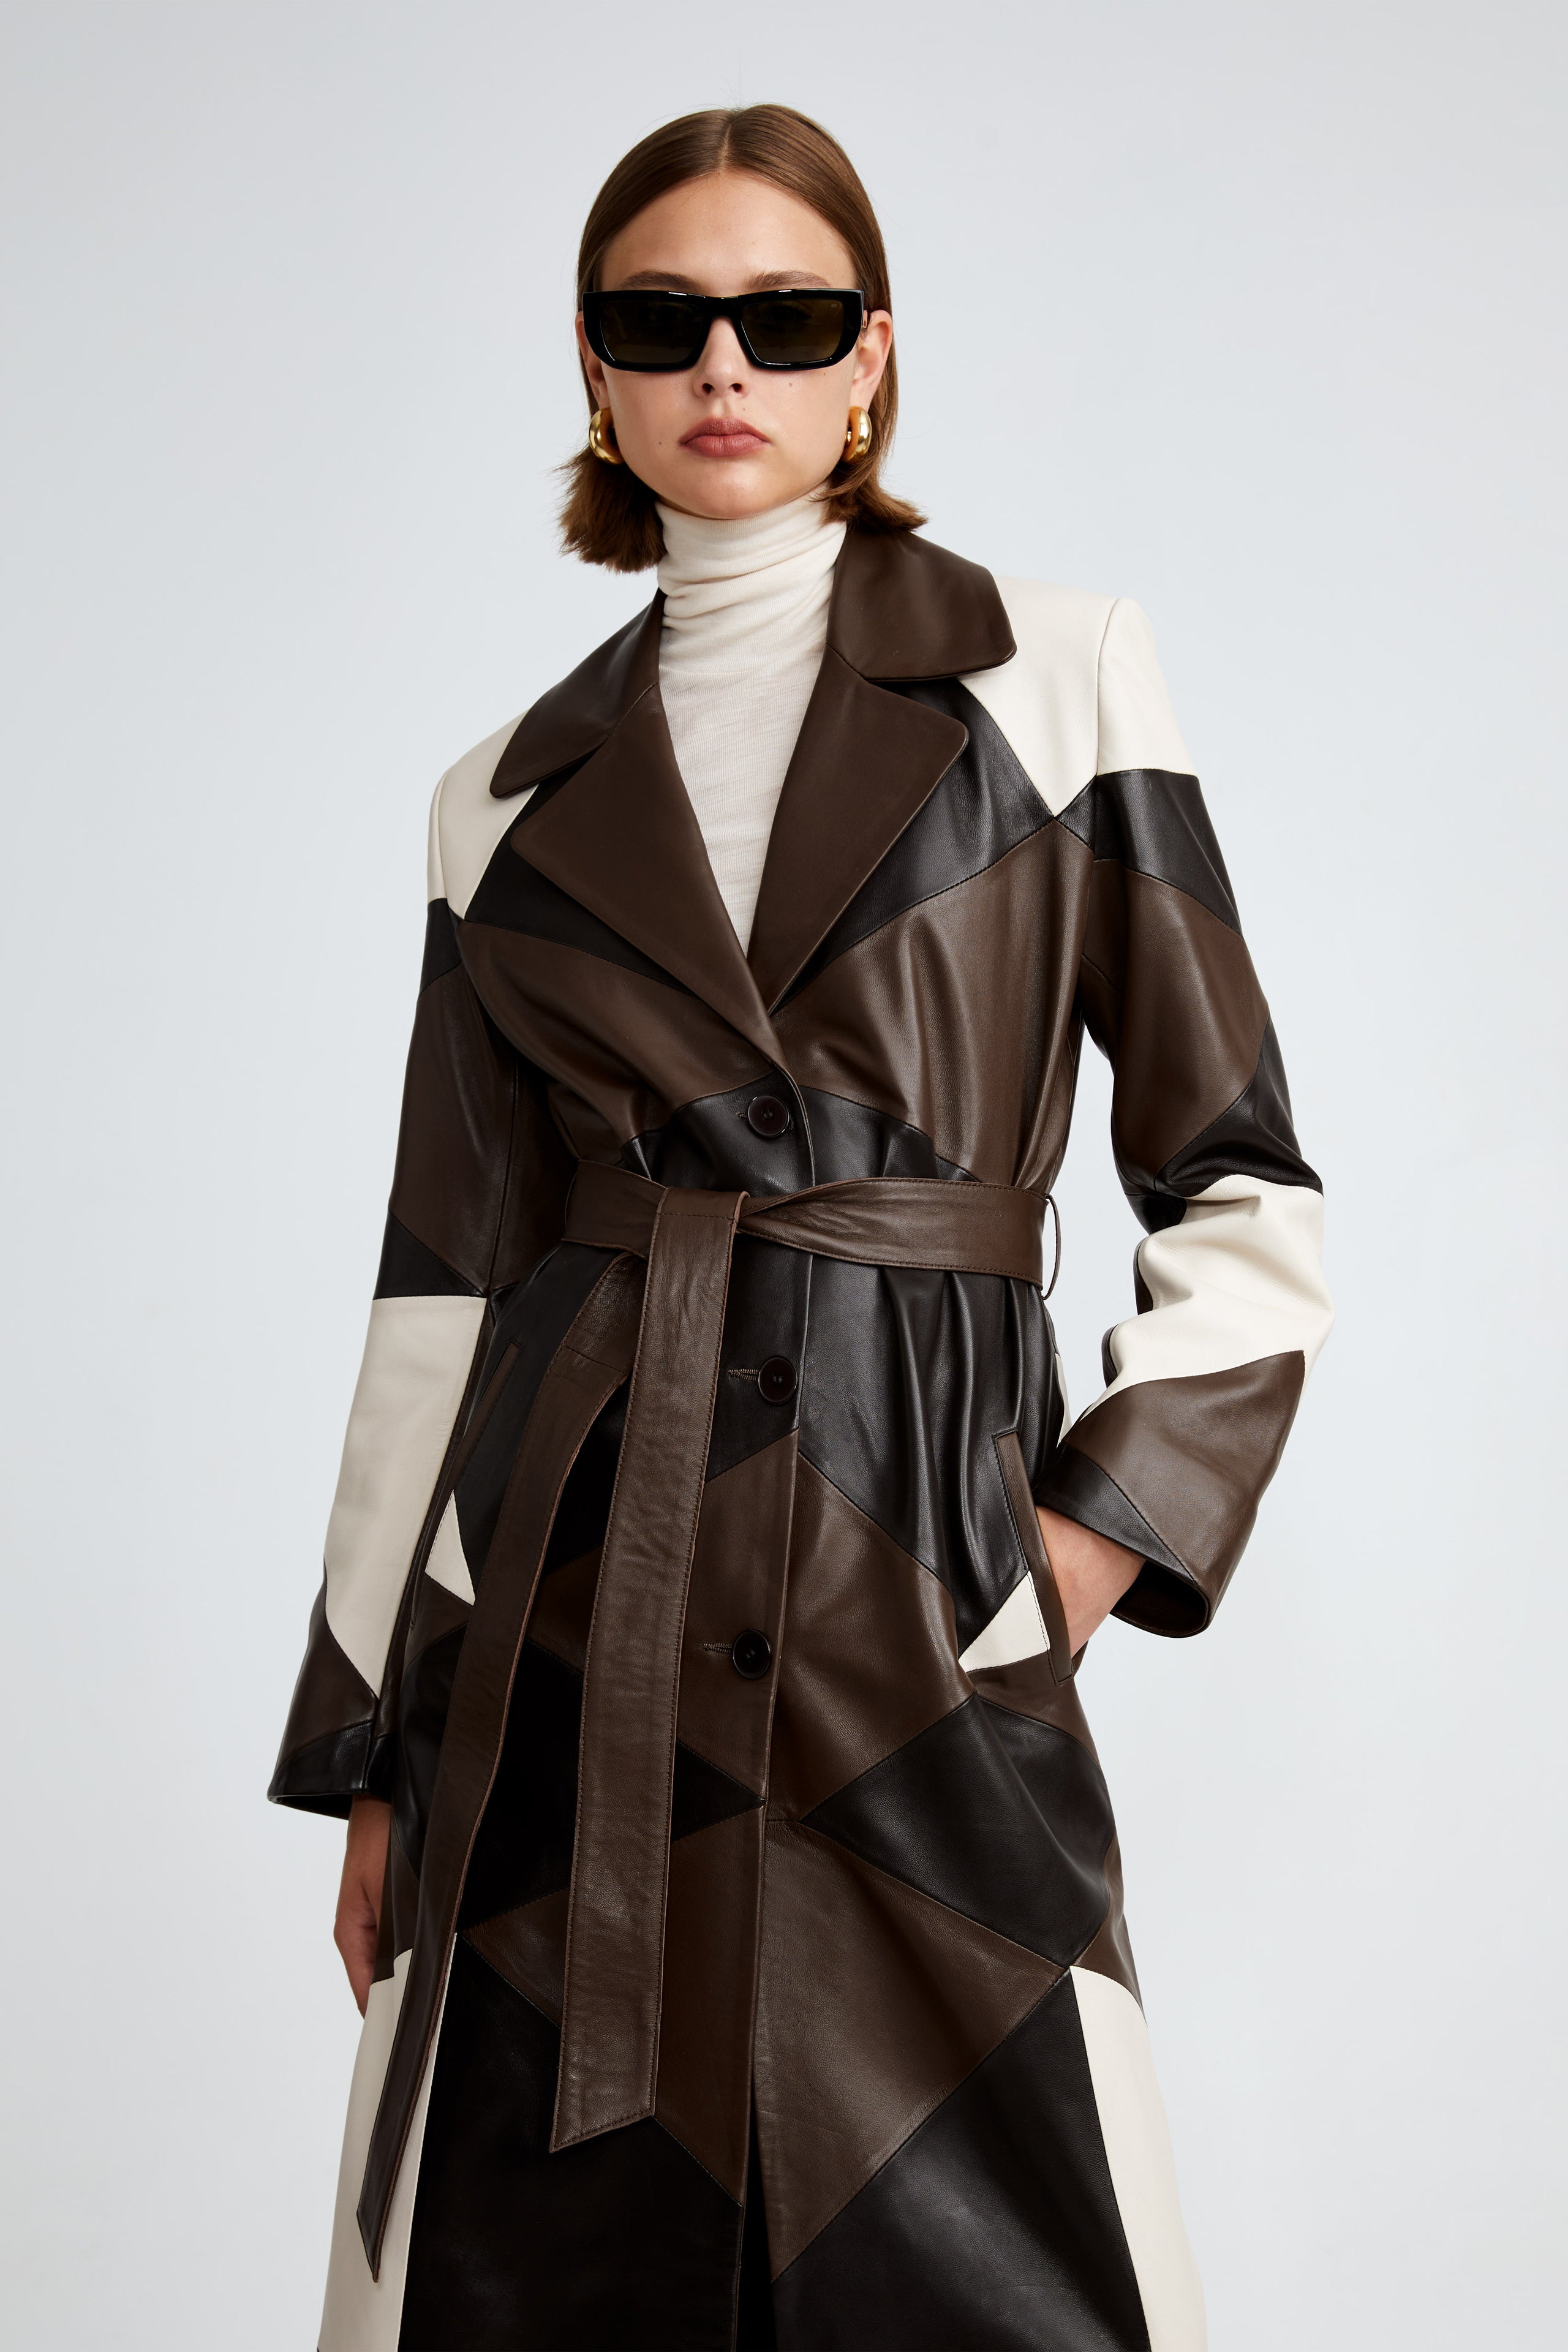 Model is wearing the Sonja Cocoa Vanilla Brown Patchwork Leather Trench Close Up